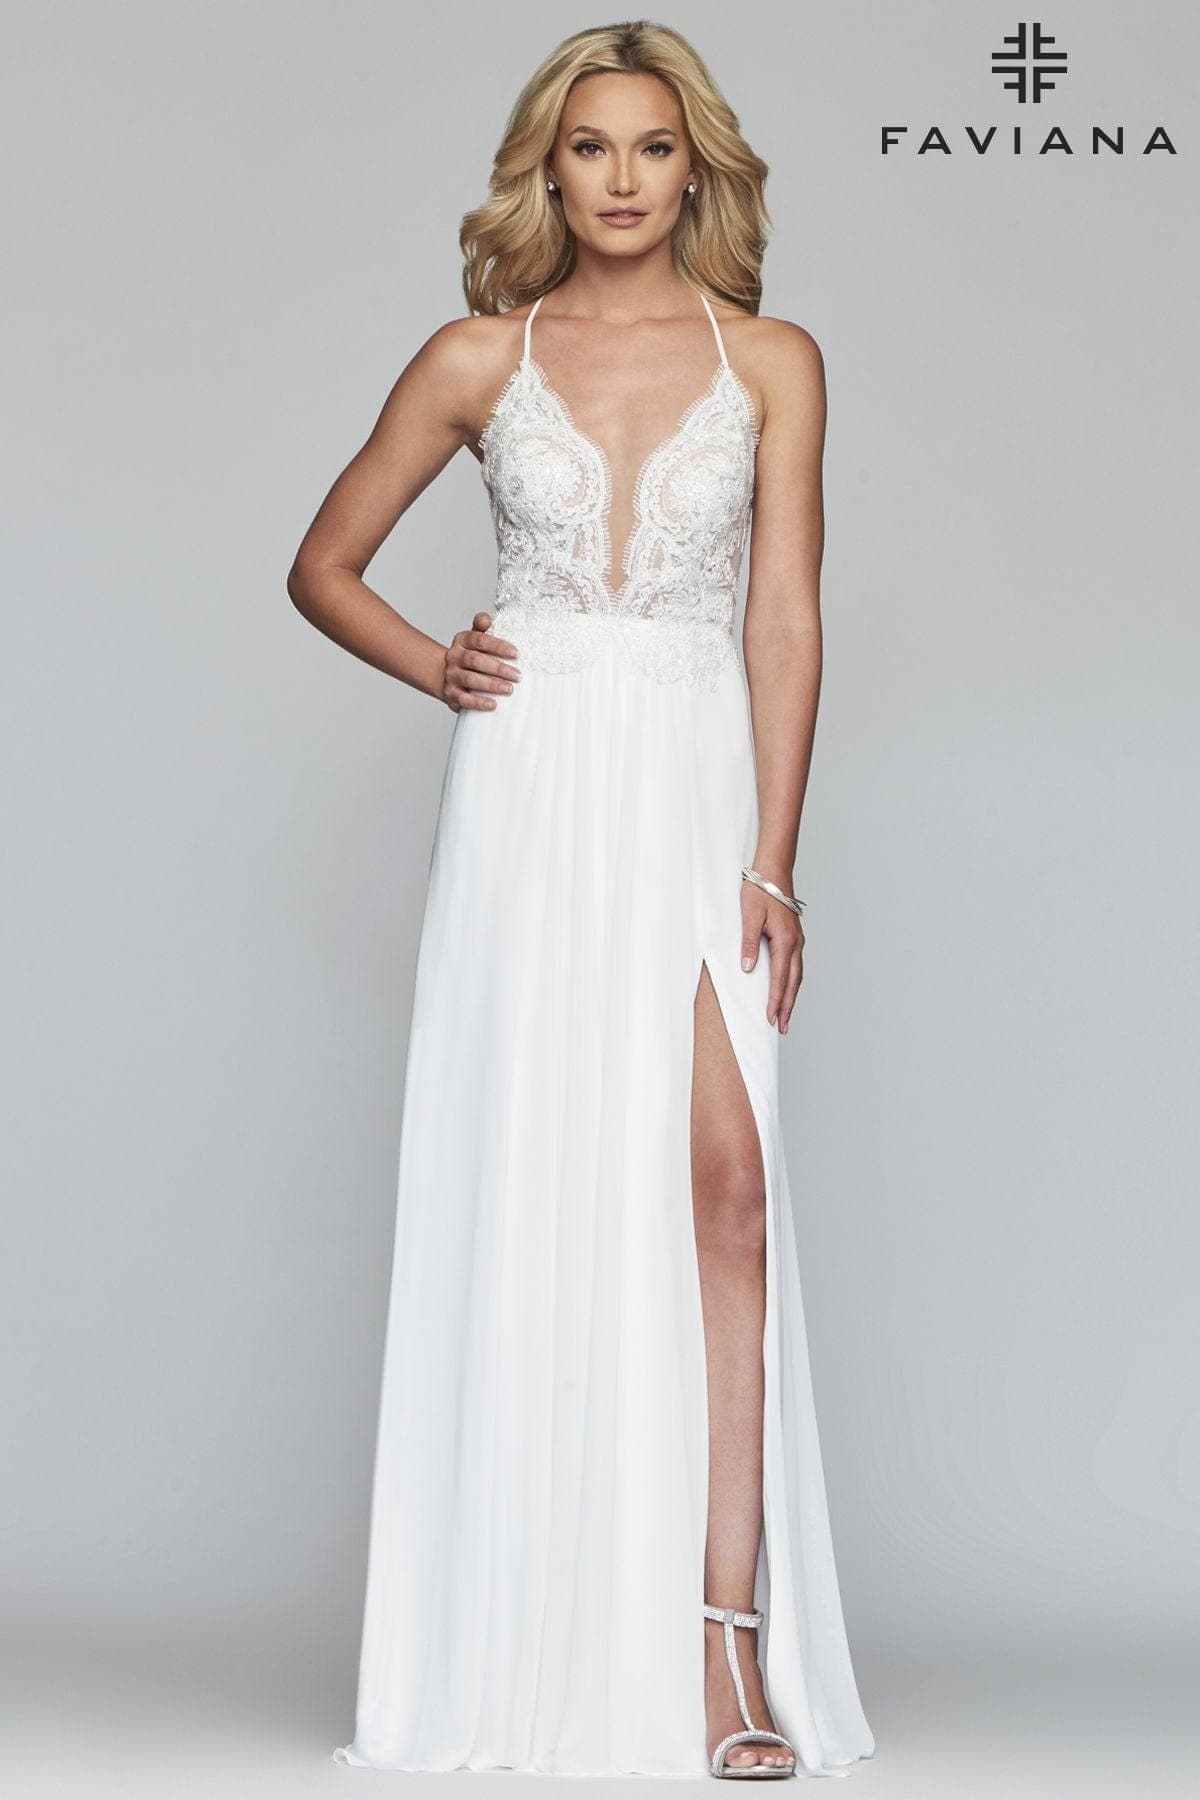 V Neck Long Chiffon Dress With Beaded Lace Applique Bodice